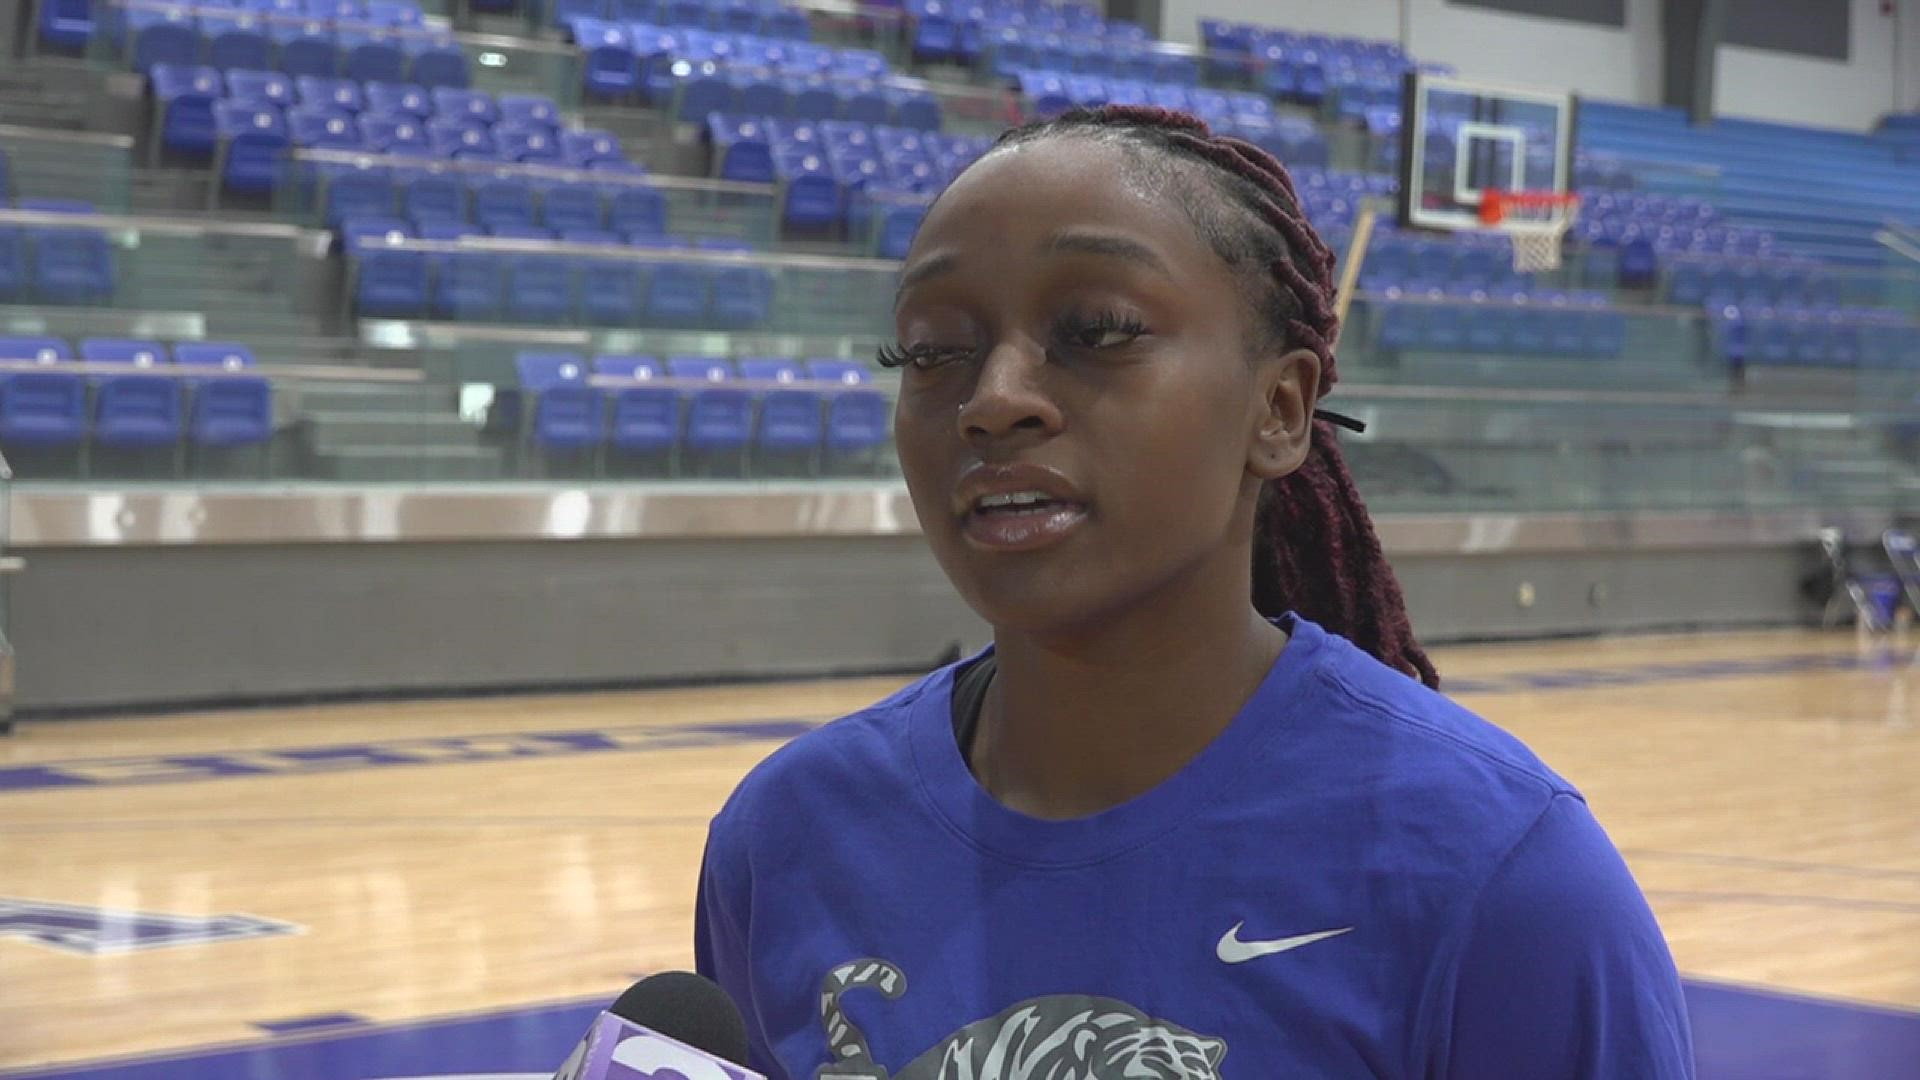 Memphis Women's basketball has an entirely new coaching staff, push for more wins and local support ahead of season